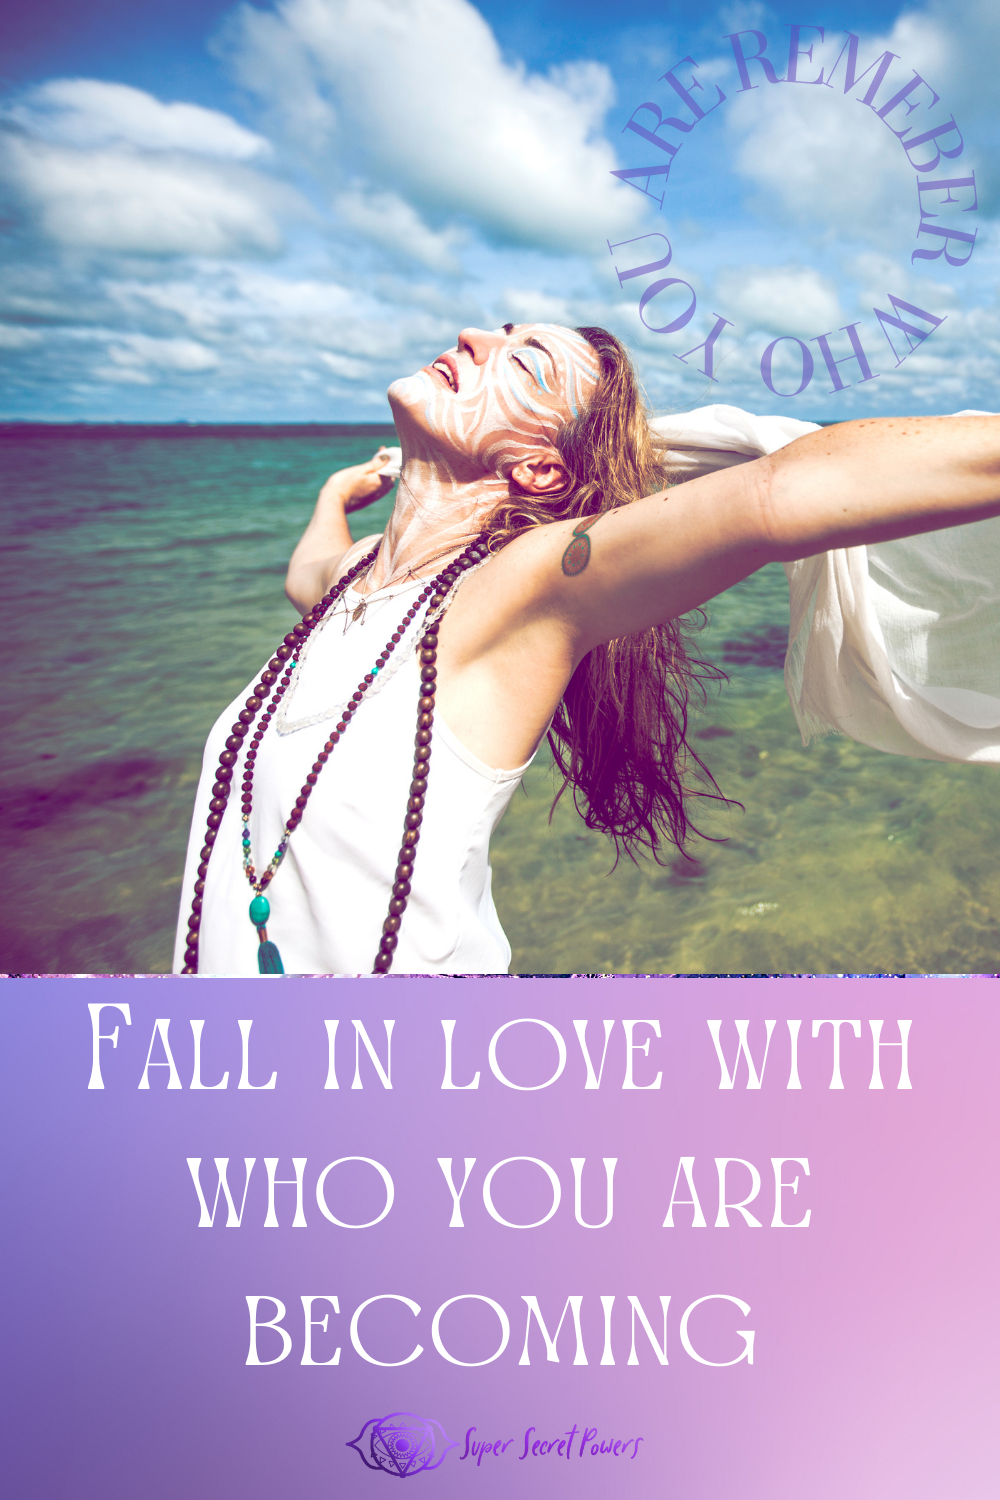 Fall in love with who you are becoming